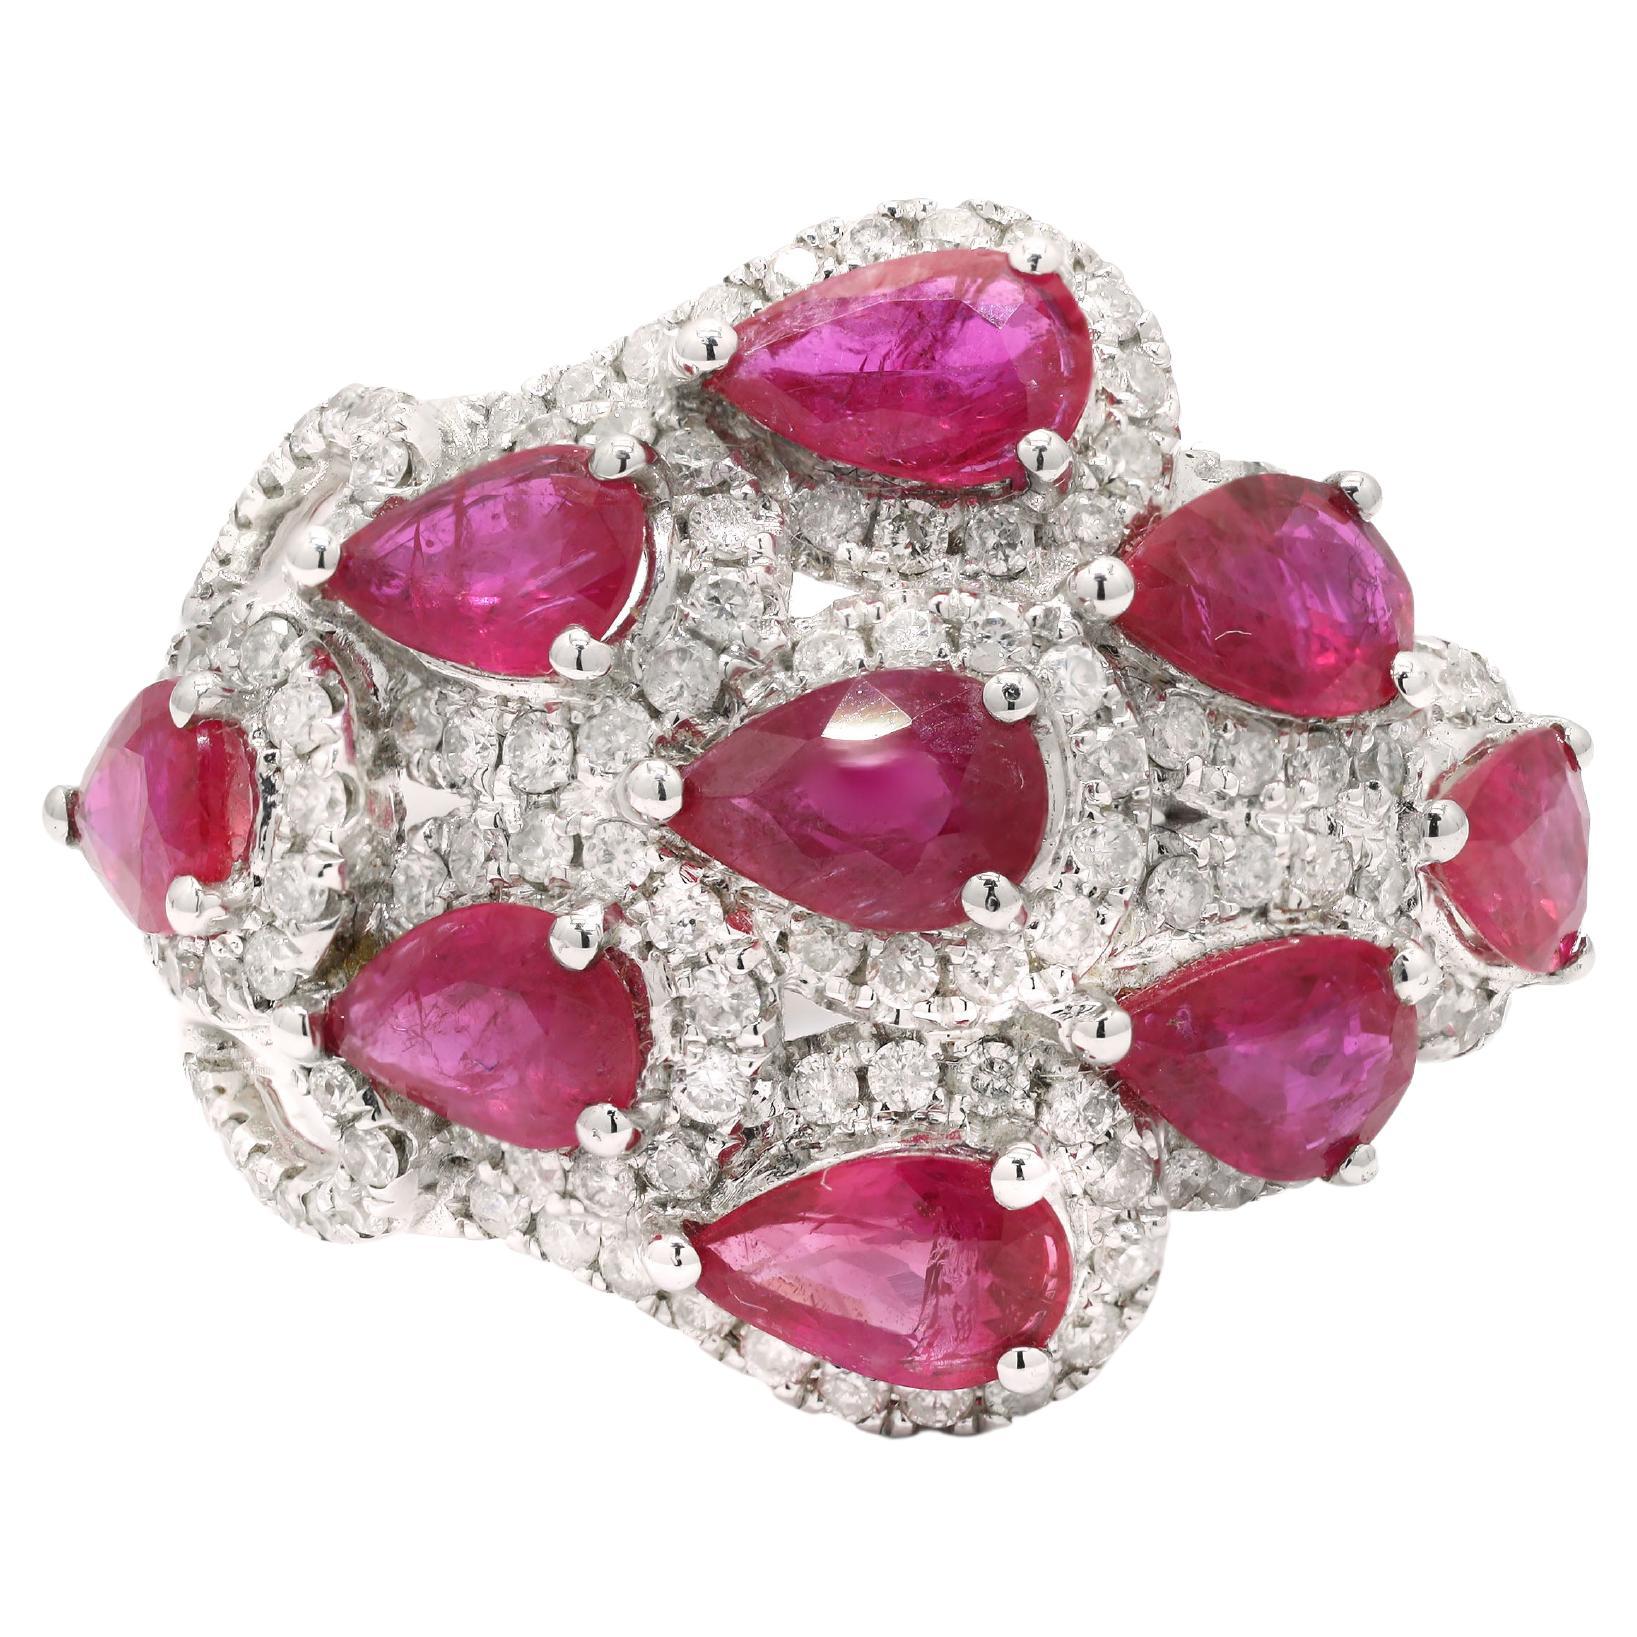 2.01 Carat Ruby and Diamond Cocktail Ring in 18K White Gold 